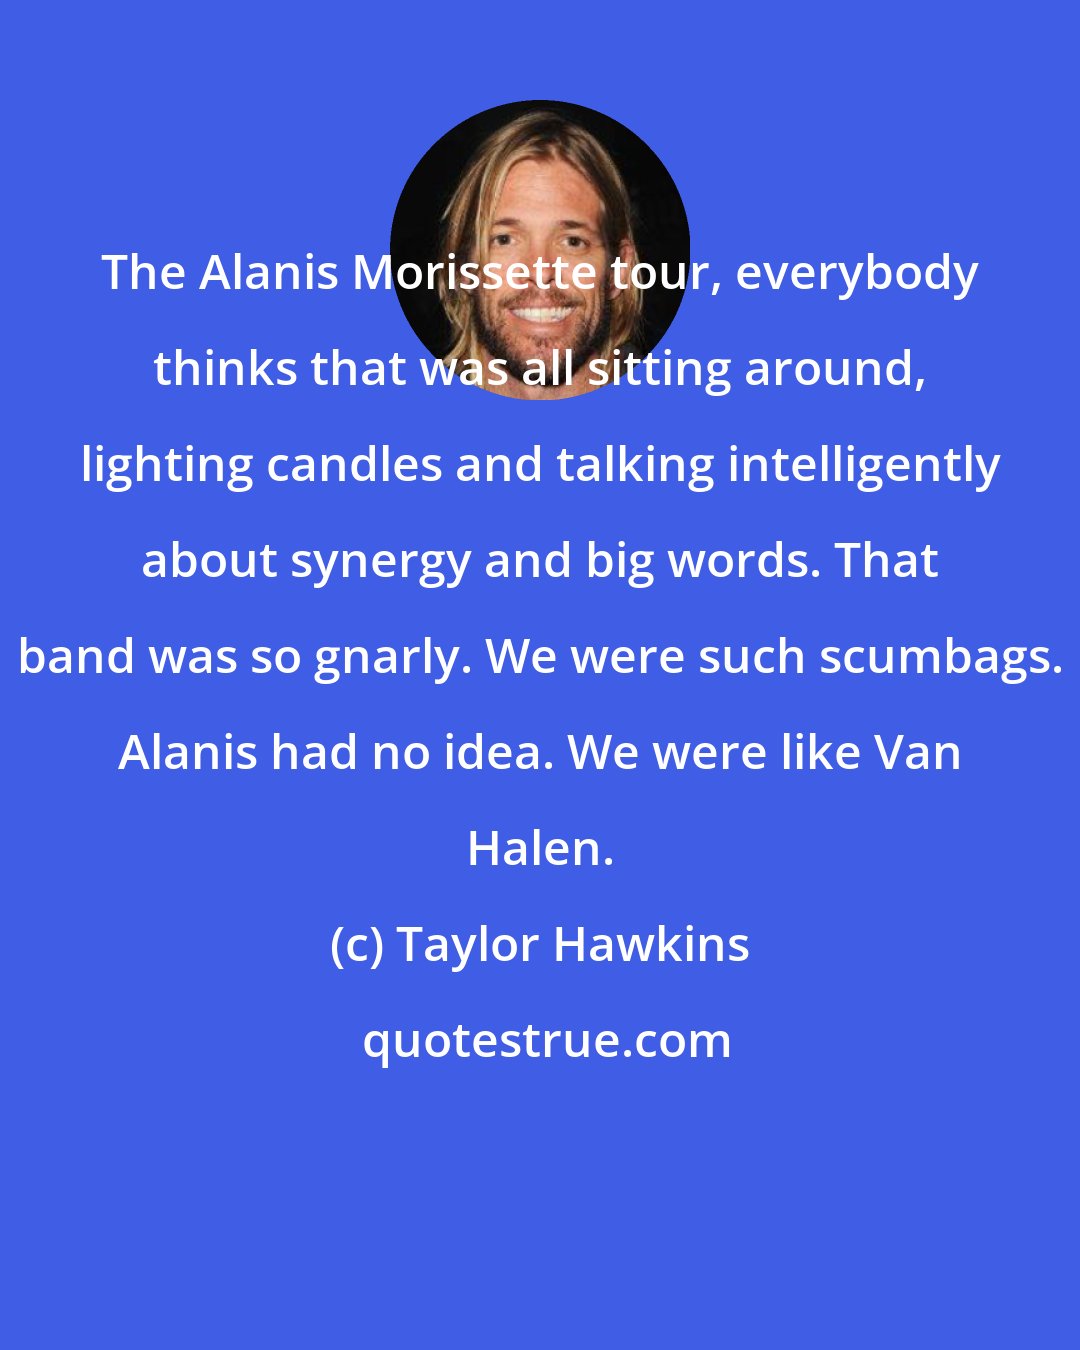 Taylor Hawkins: The Alanis Morissette tour, everybody thinks that was all sitting around, lighting candles and talking intelligently about synergy and big words. That band was so gnarly. We were such scumbags. Alanis had no idea. We were like Van Halen.